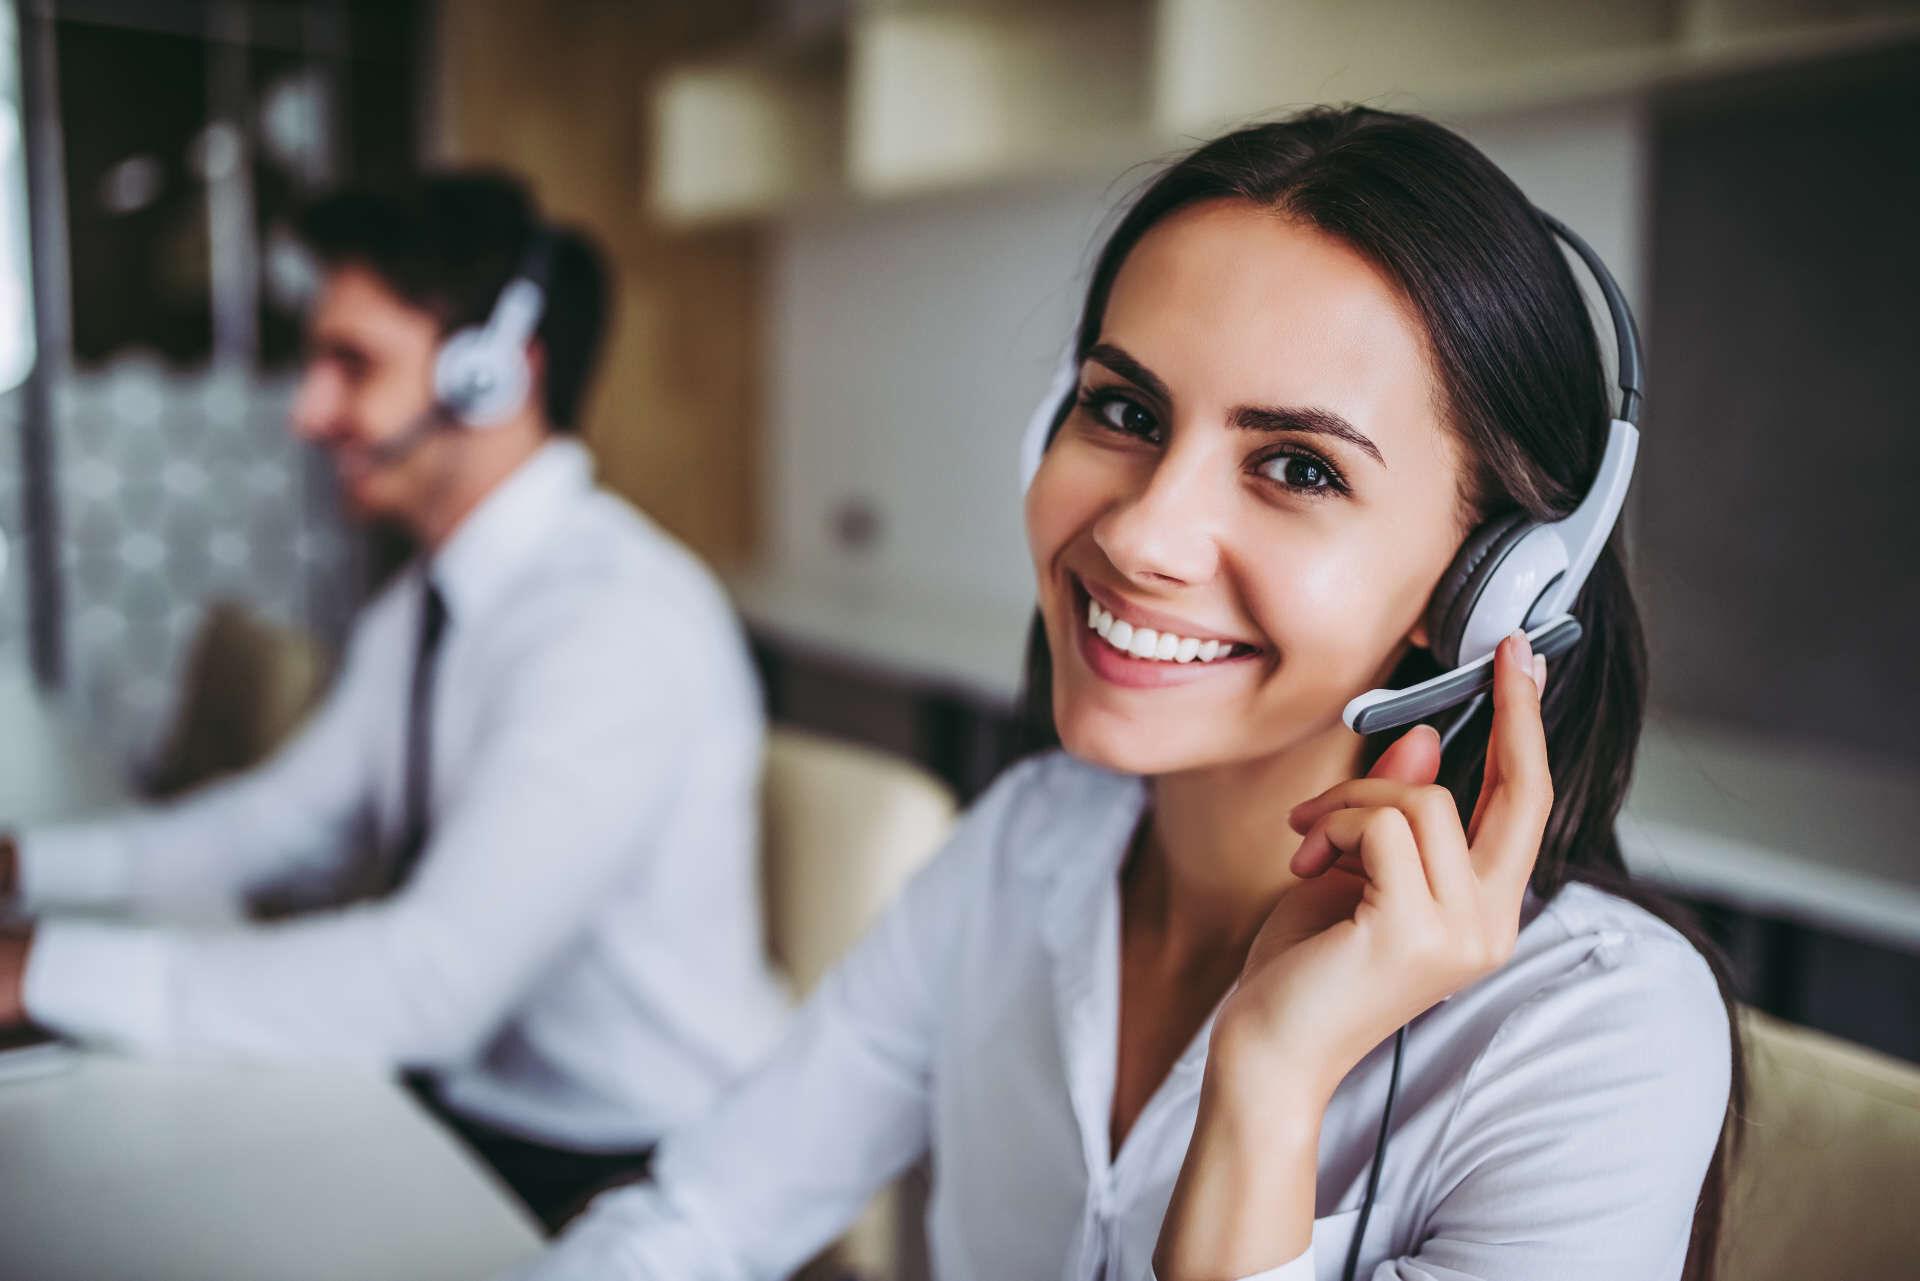 Peering-Beyond-the-Lens-Contact-Center-Customer-Experience-Services